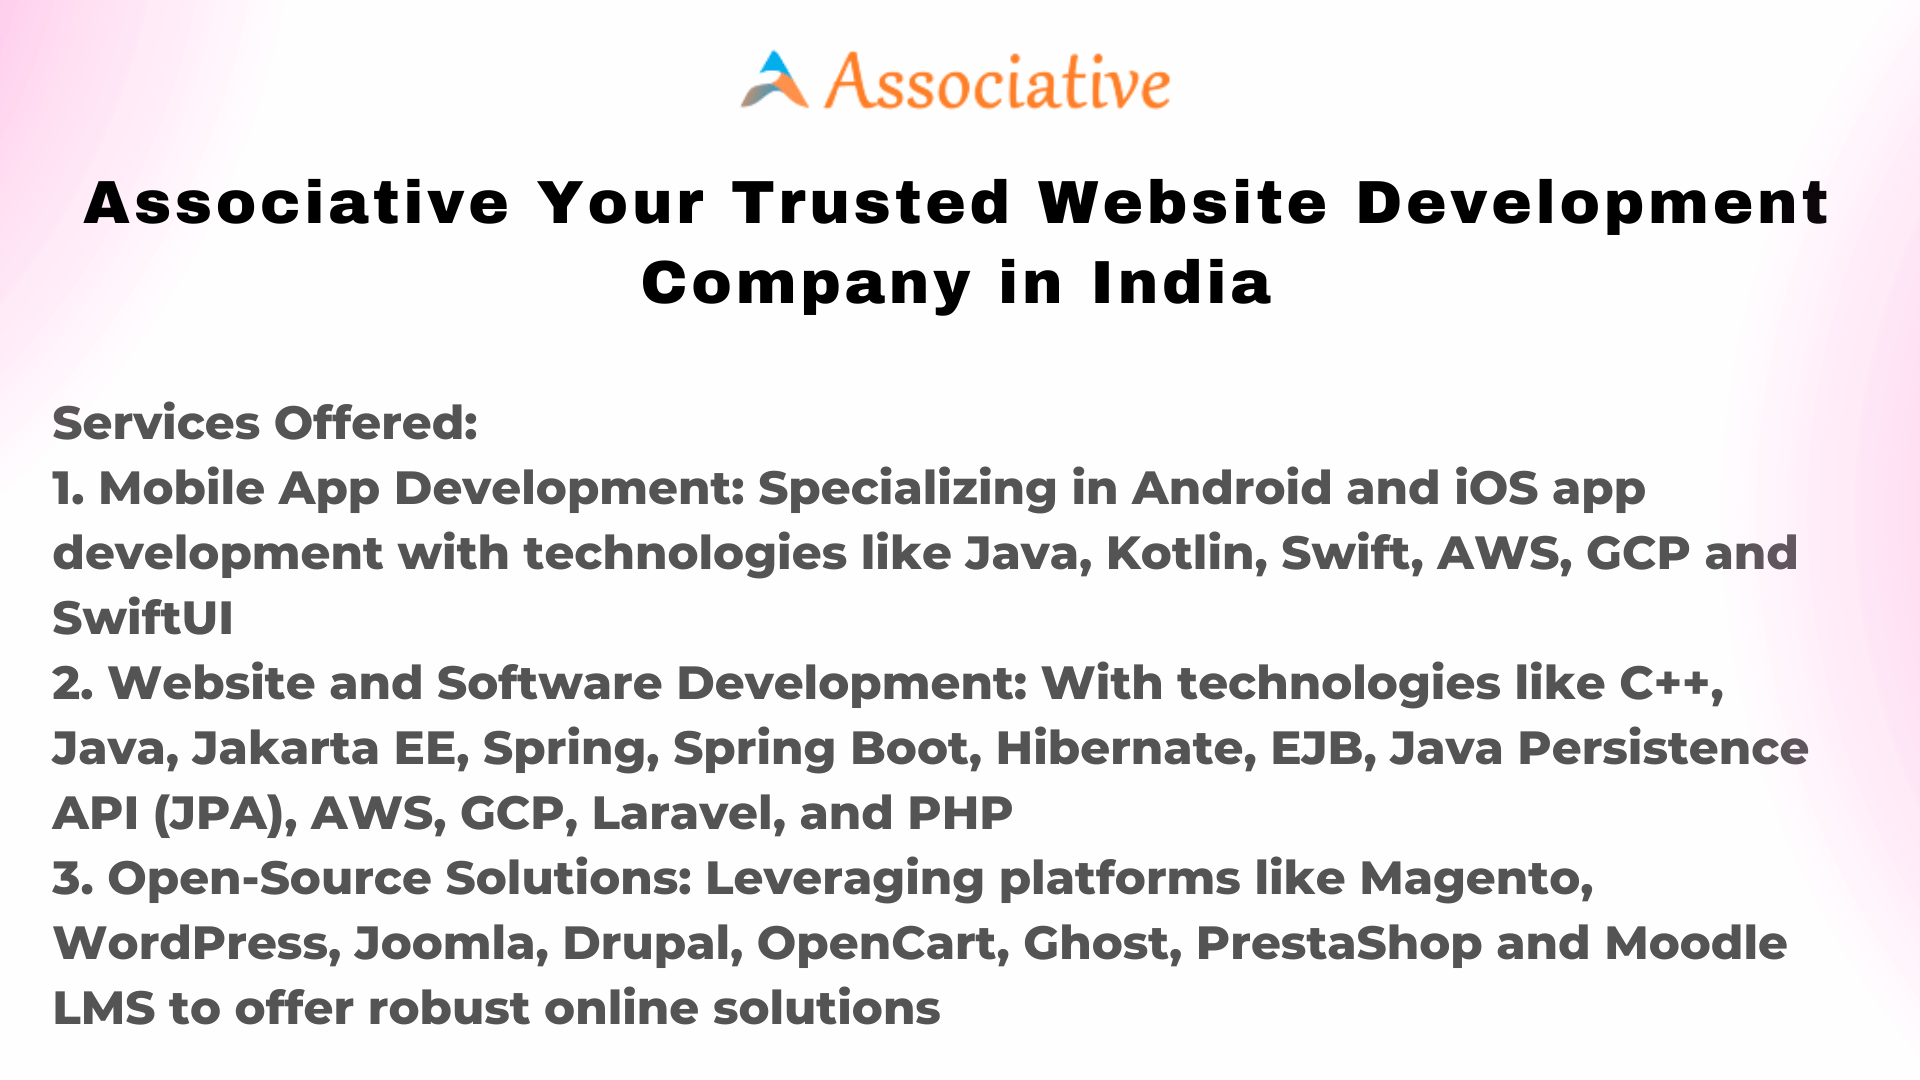 Associative Your Trusted Website Development Company in India